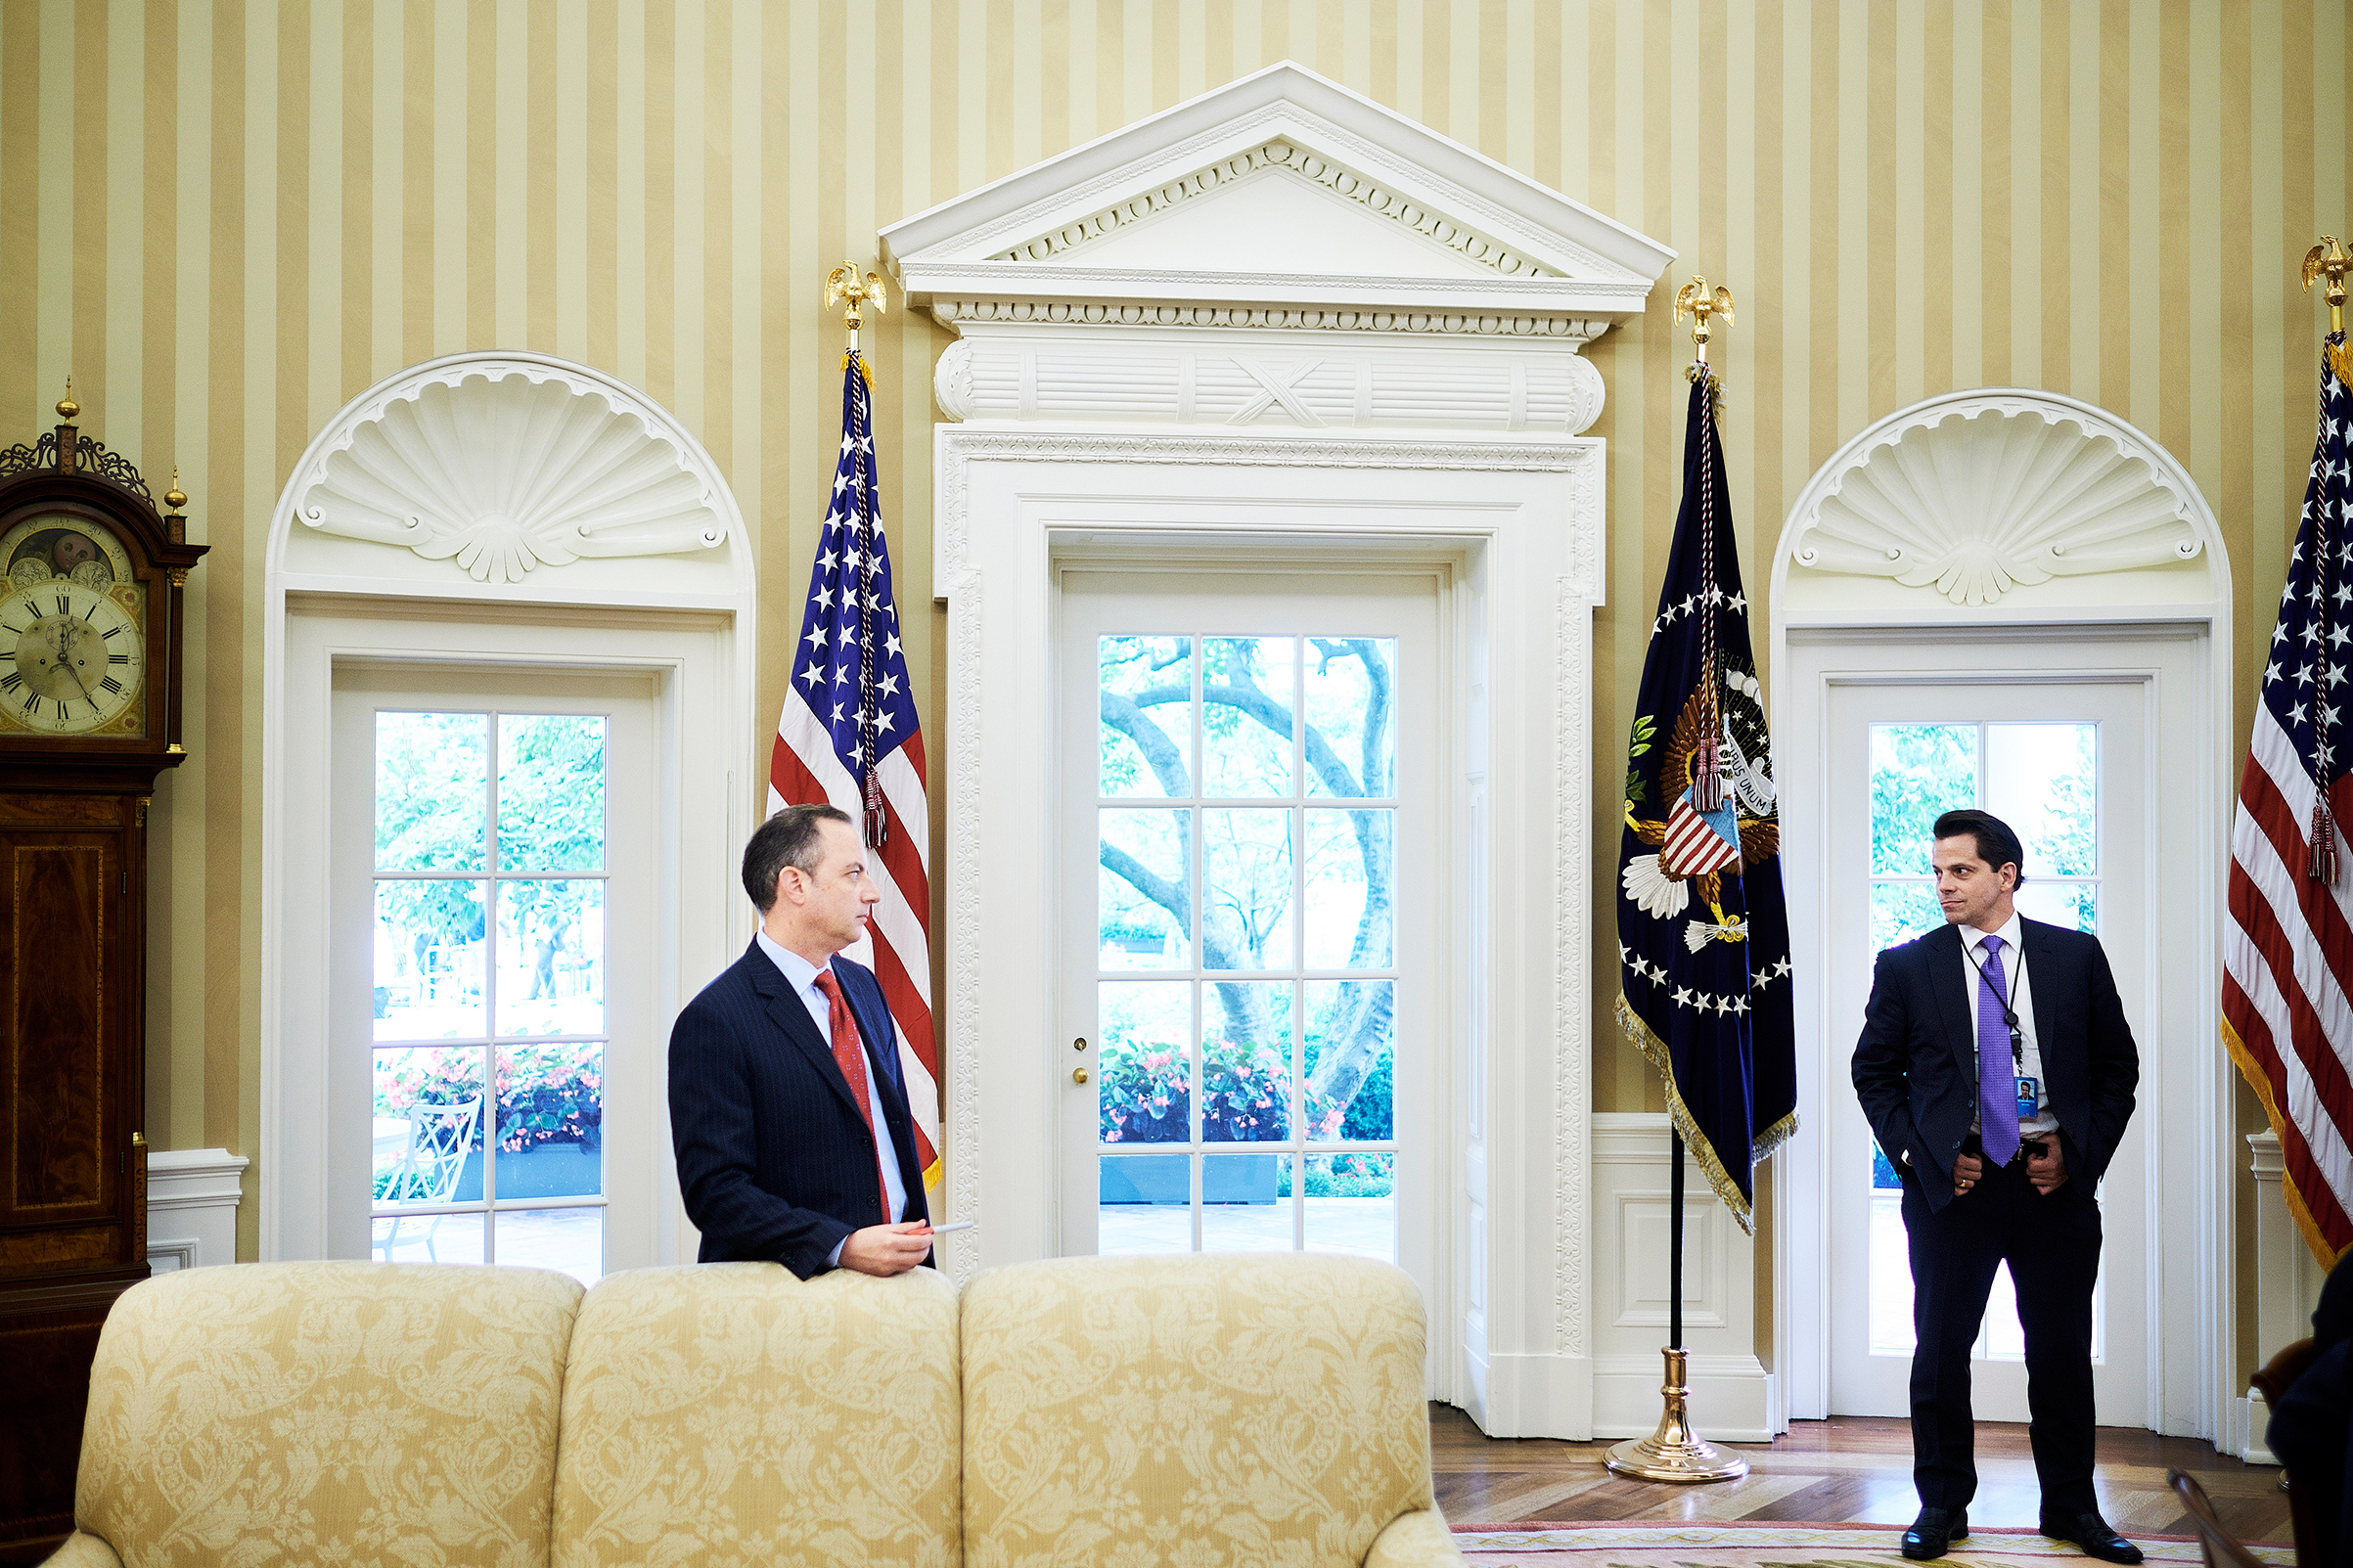 reince-priebus-anthony-scaramucci-oval-office-2405